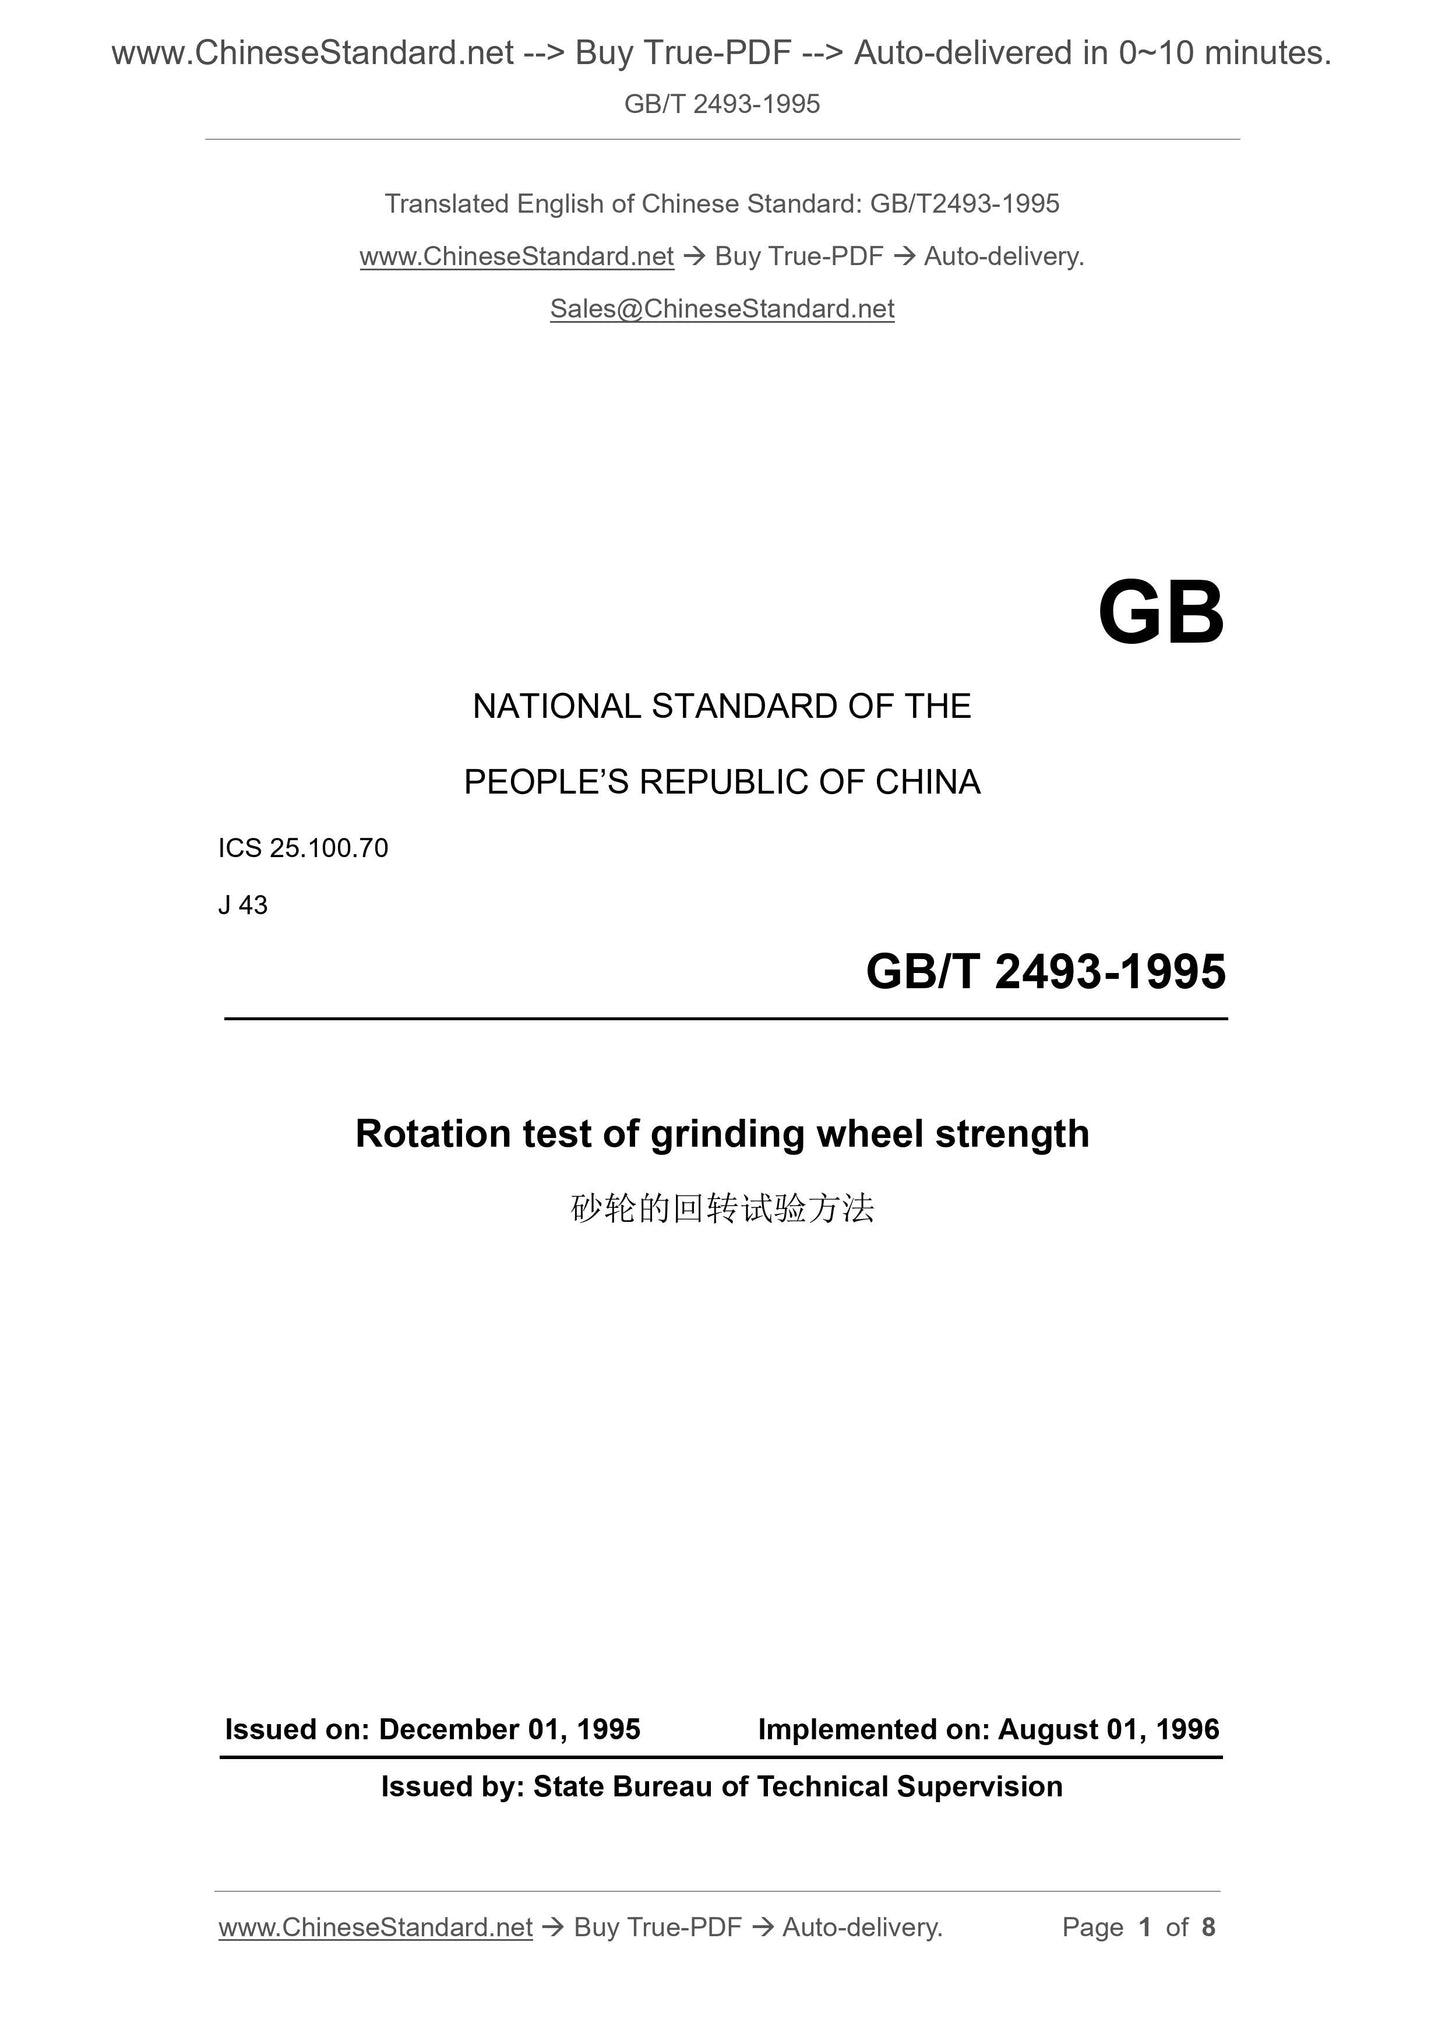 GB/T 2493-1995 Page 1